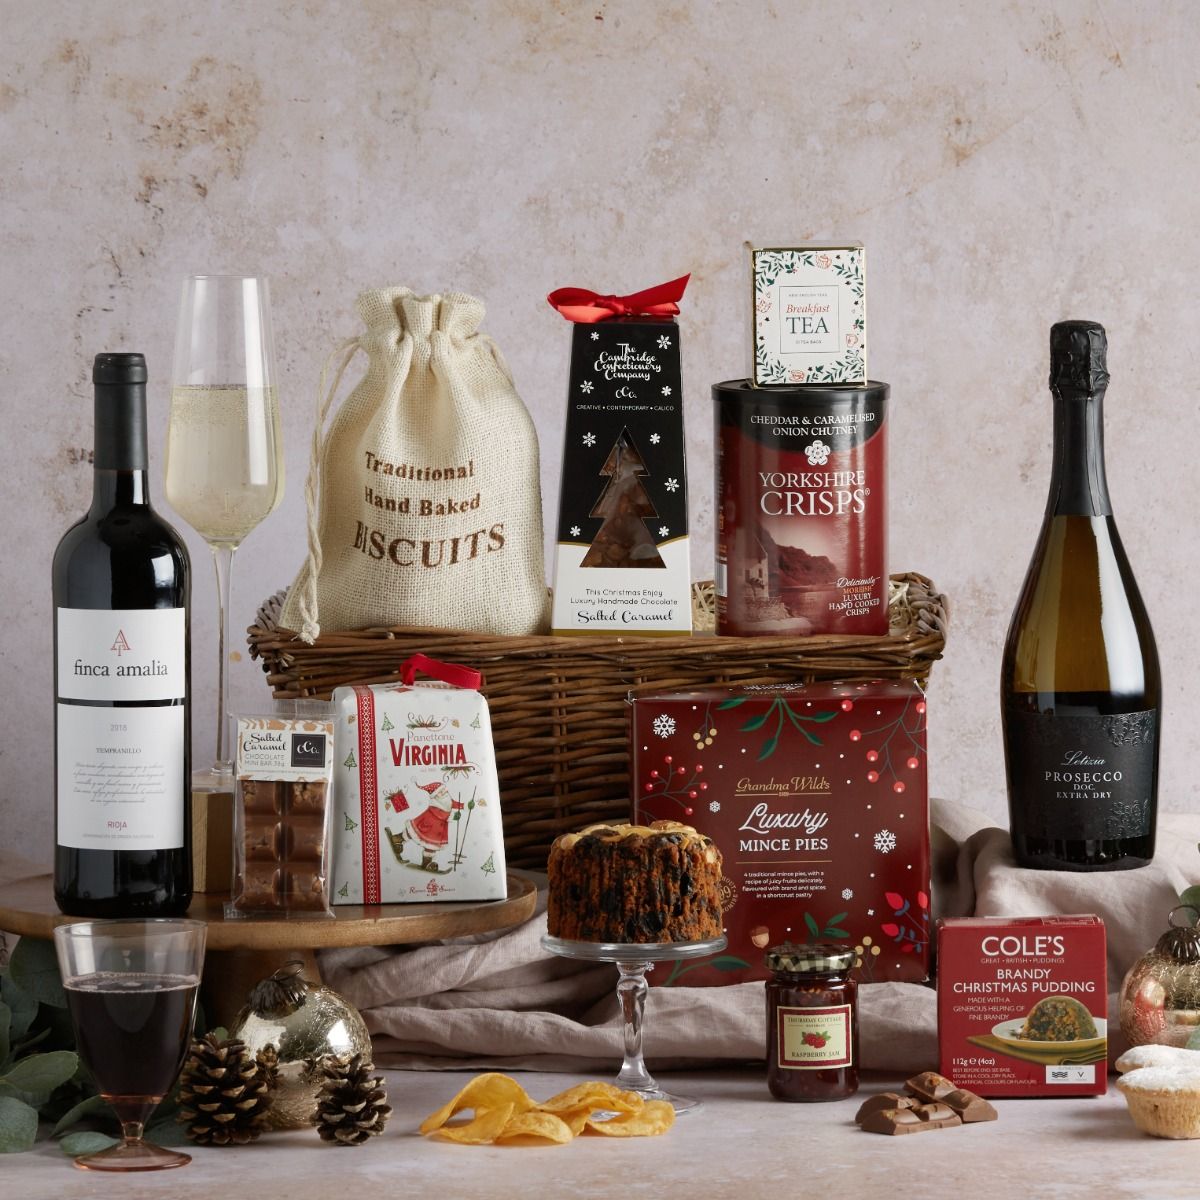 Sleigh Bells Christmas Basket with contents on display and open basket, plus a glass of Prosecco